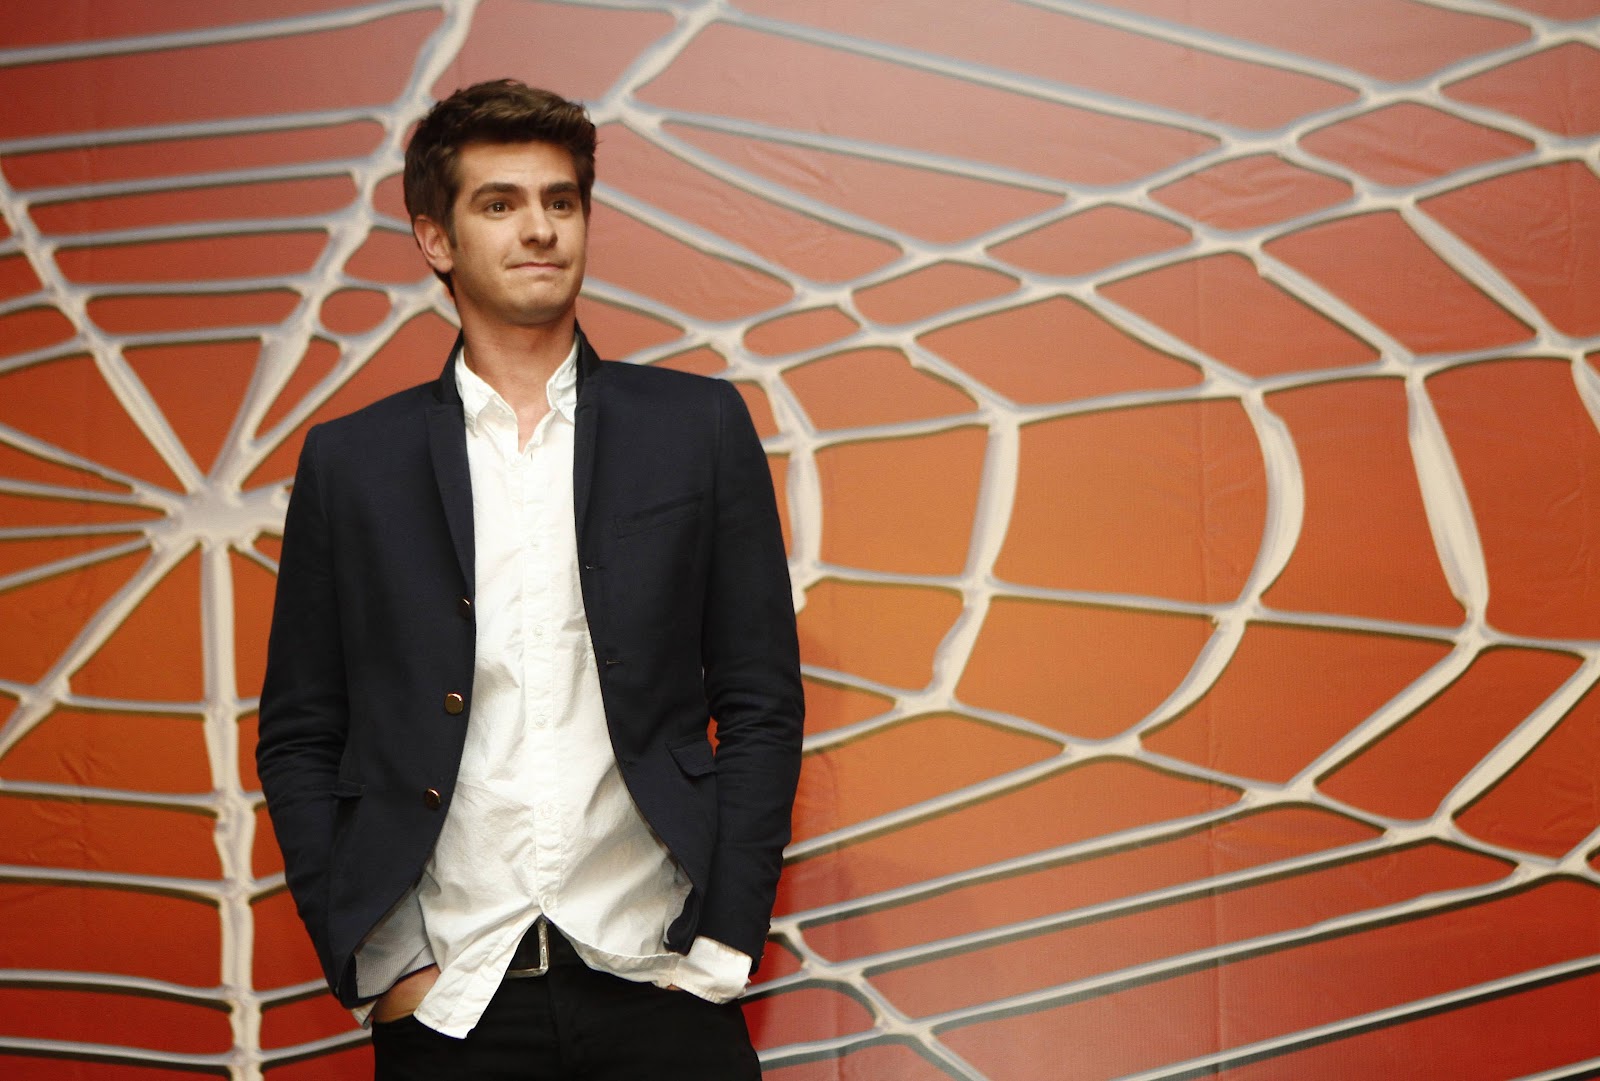 Andrew Garfield New HD Wallpapers 2012 ~ HOT CELEBRITY: Emma Stone